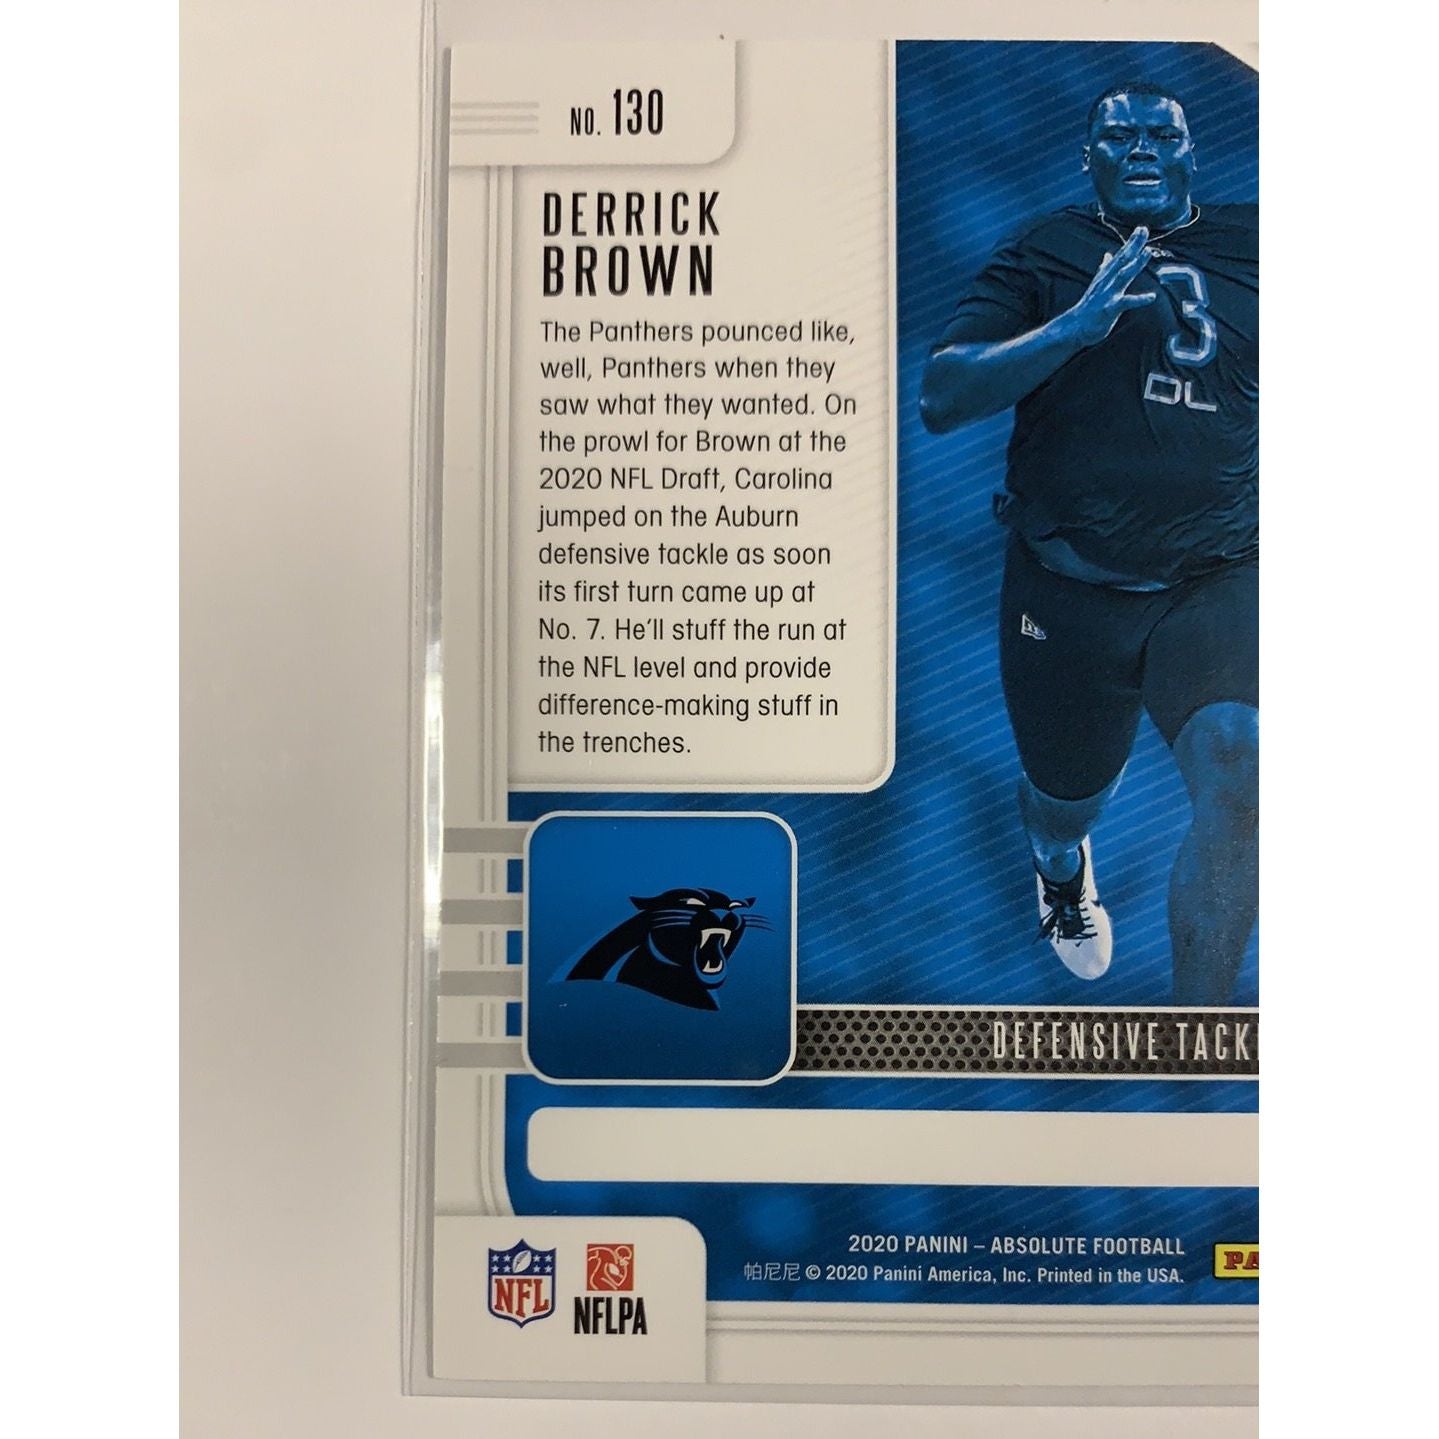  2020 Panini Absolute Derrick Brown RC  Local Legends Cards & Collectibles